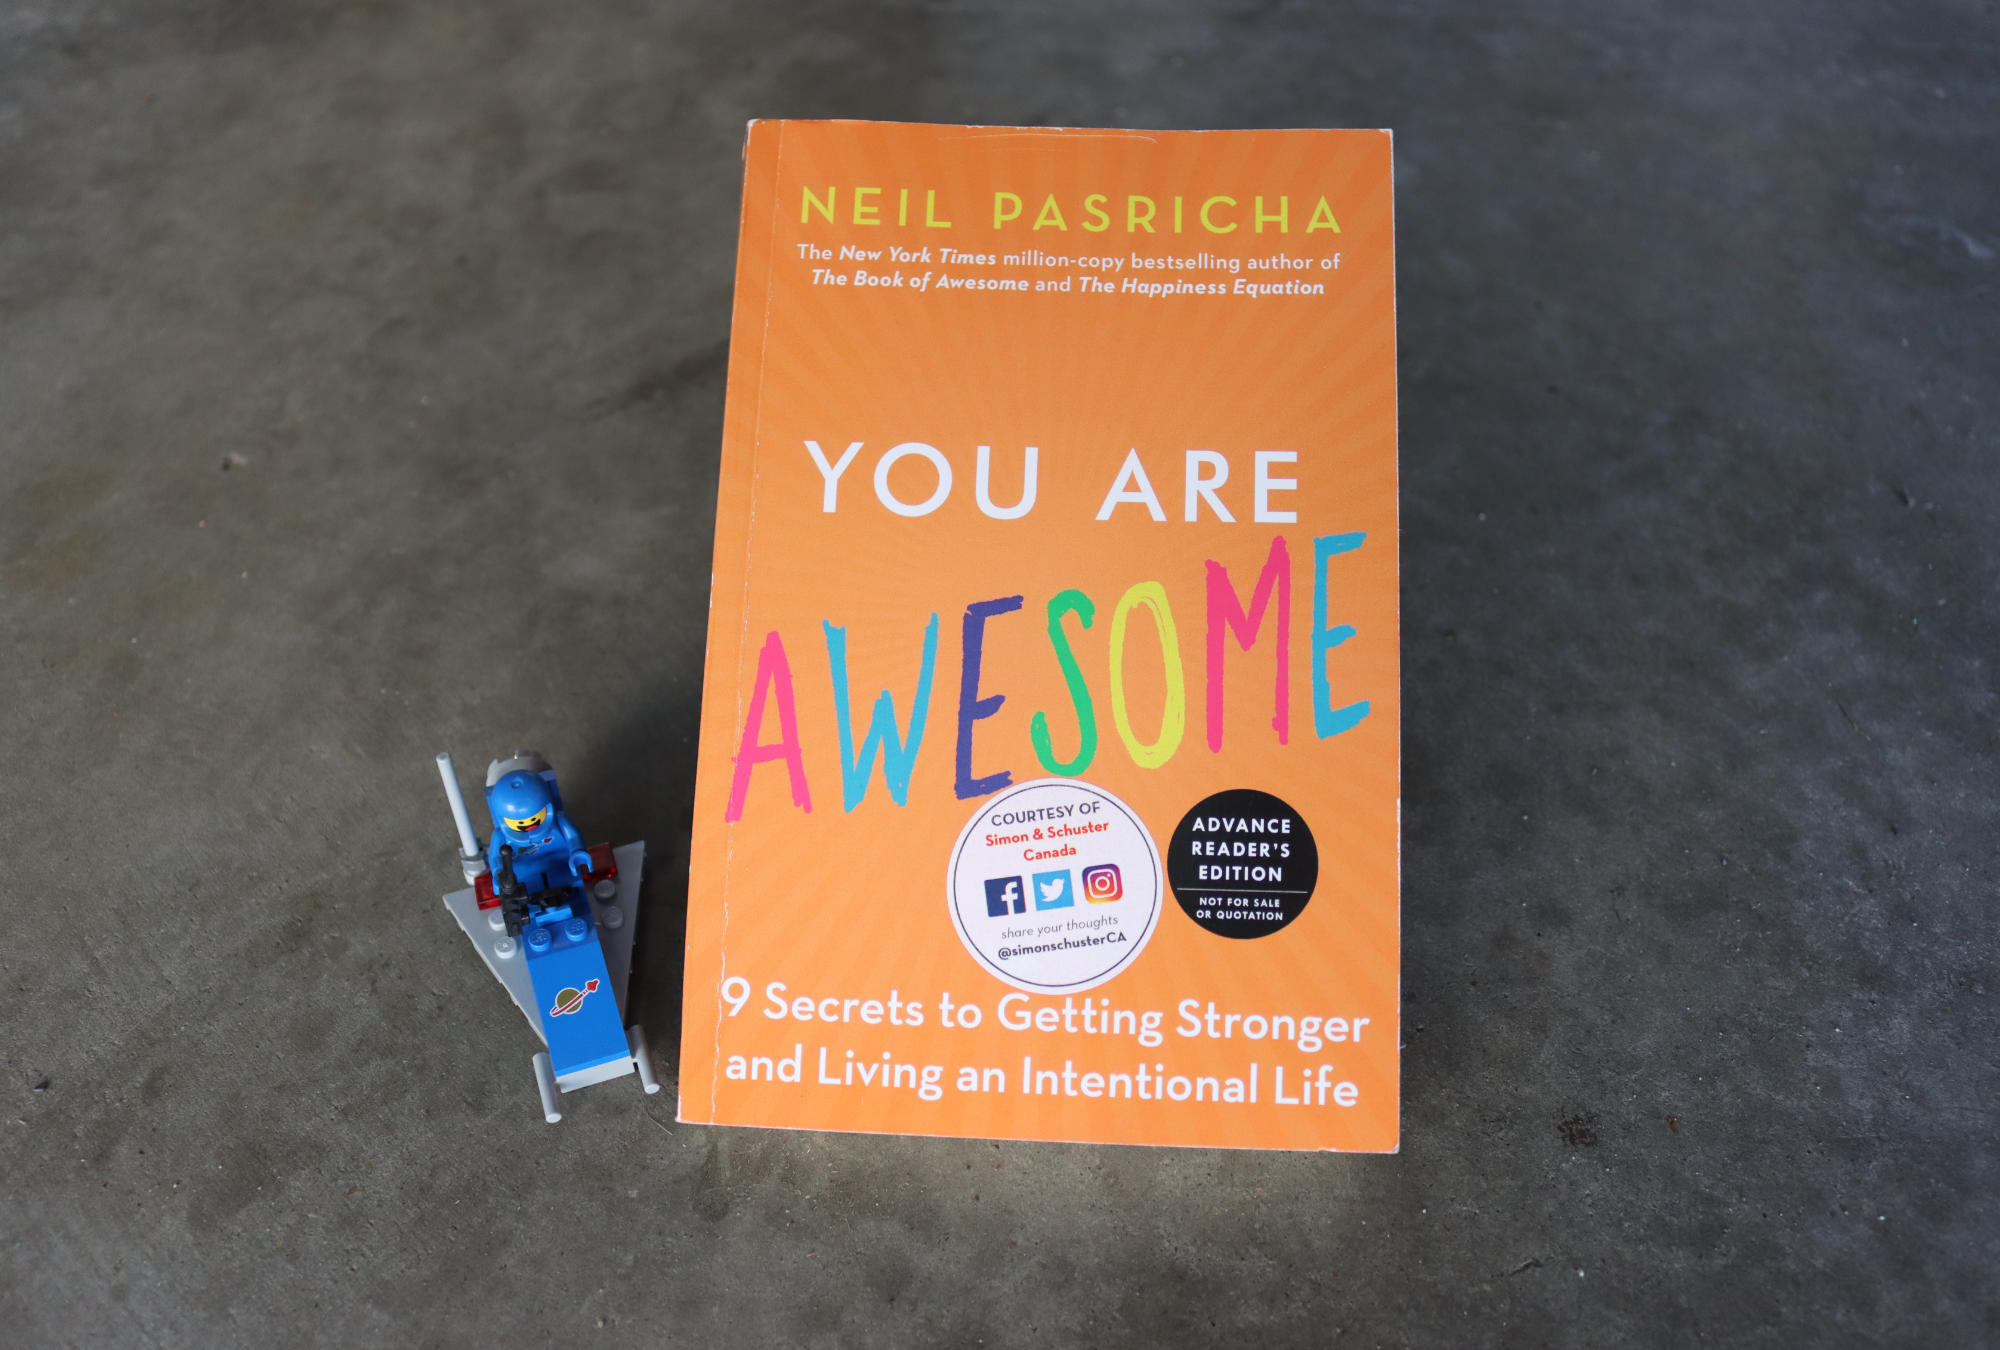 Remember: You Are Awesome